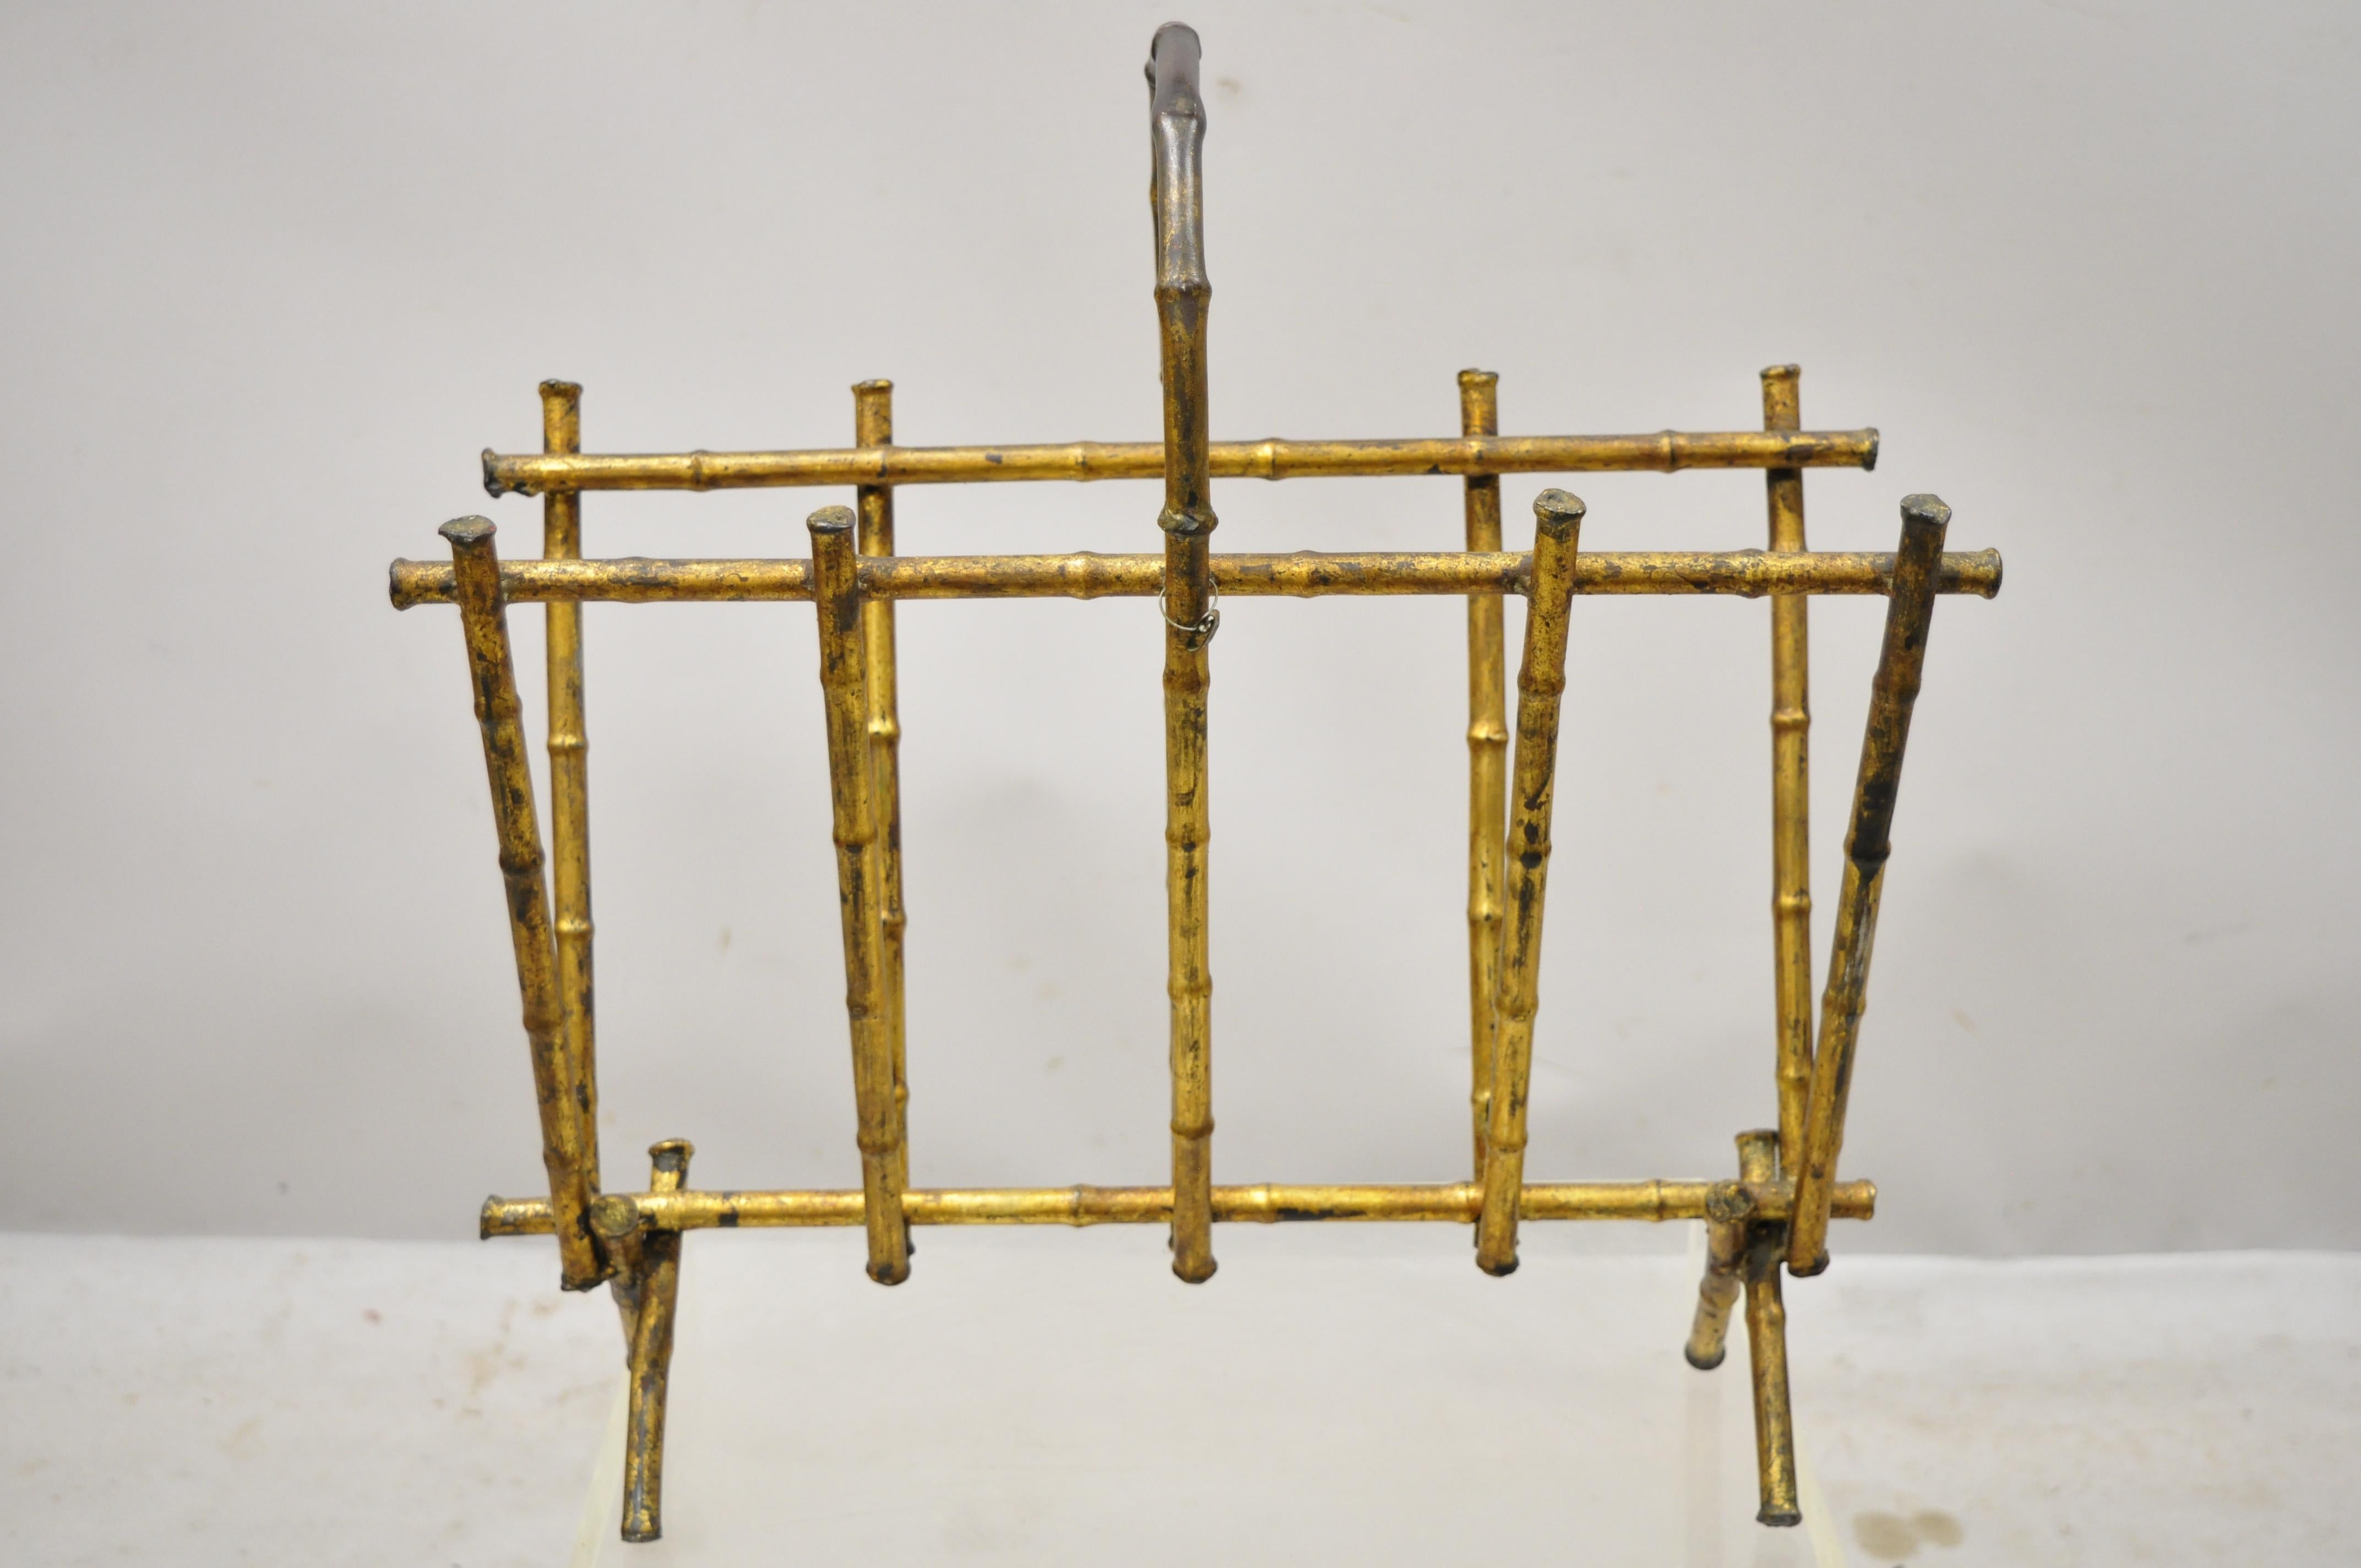 Vintage Italian Hollywood Regency faux bamboo gold gilt metal tole magazine rack stand, circa early to mid-20th century. Measurements: 18.5